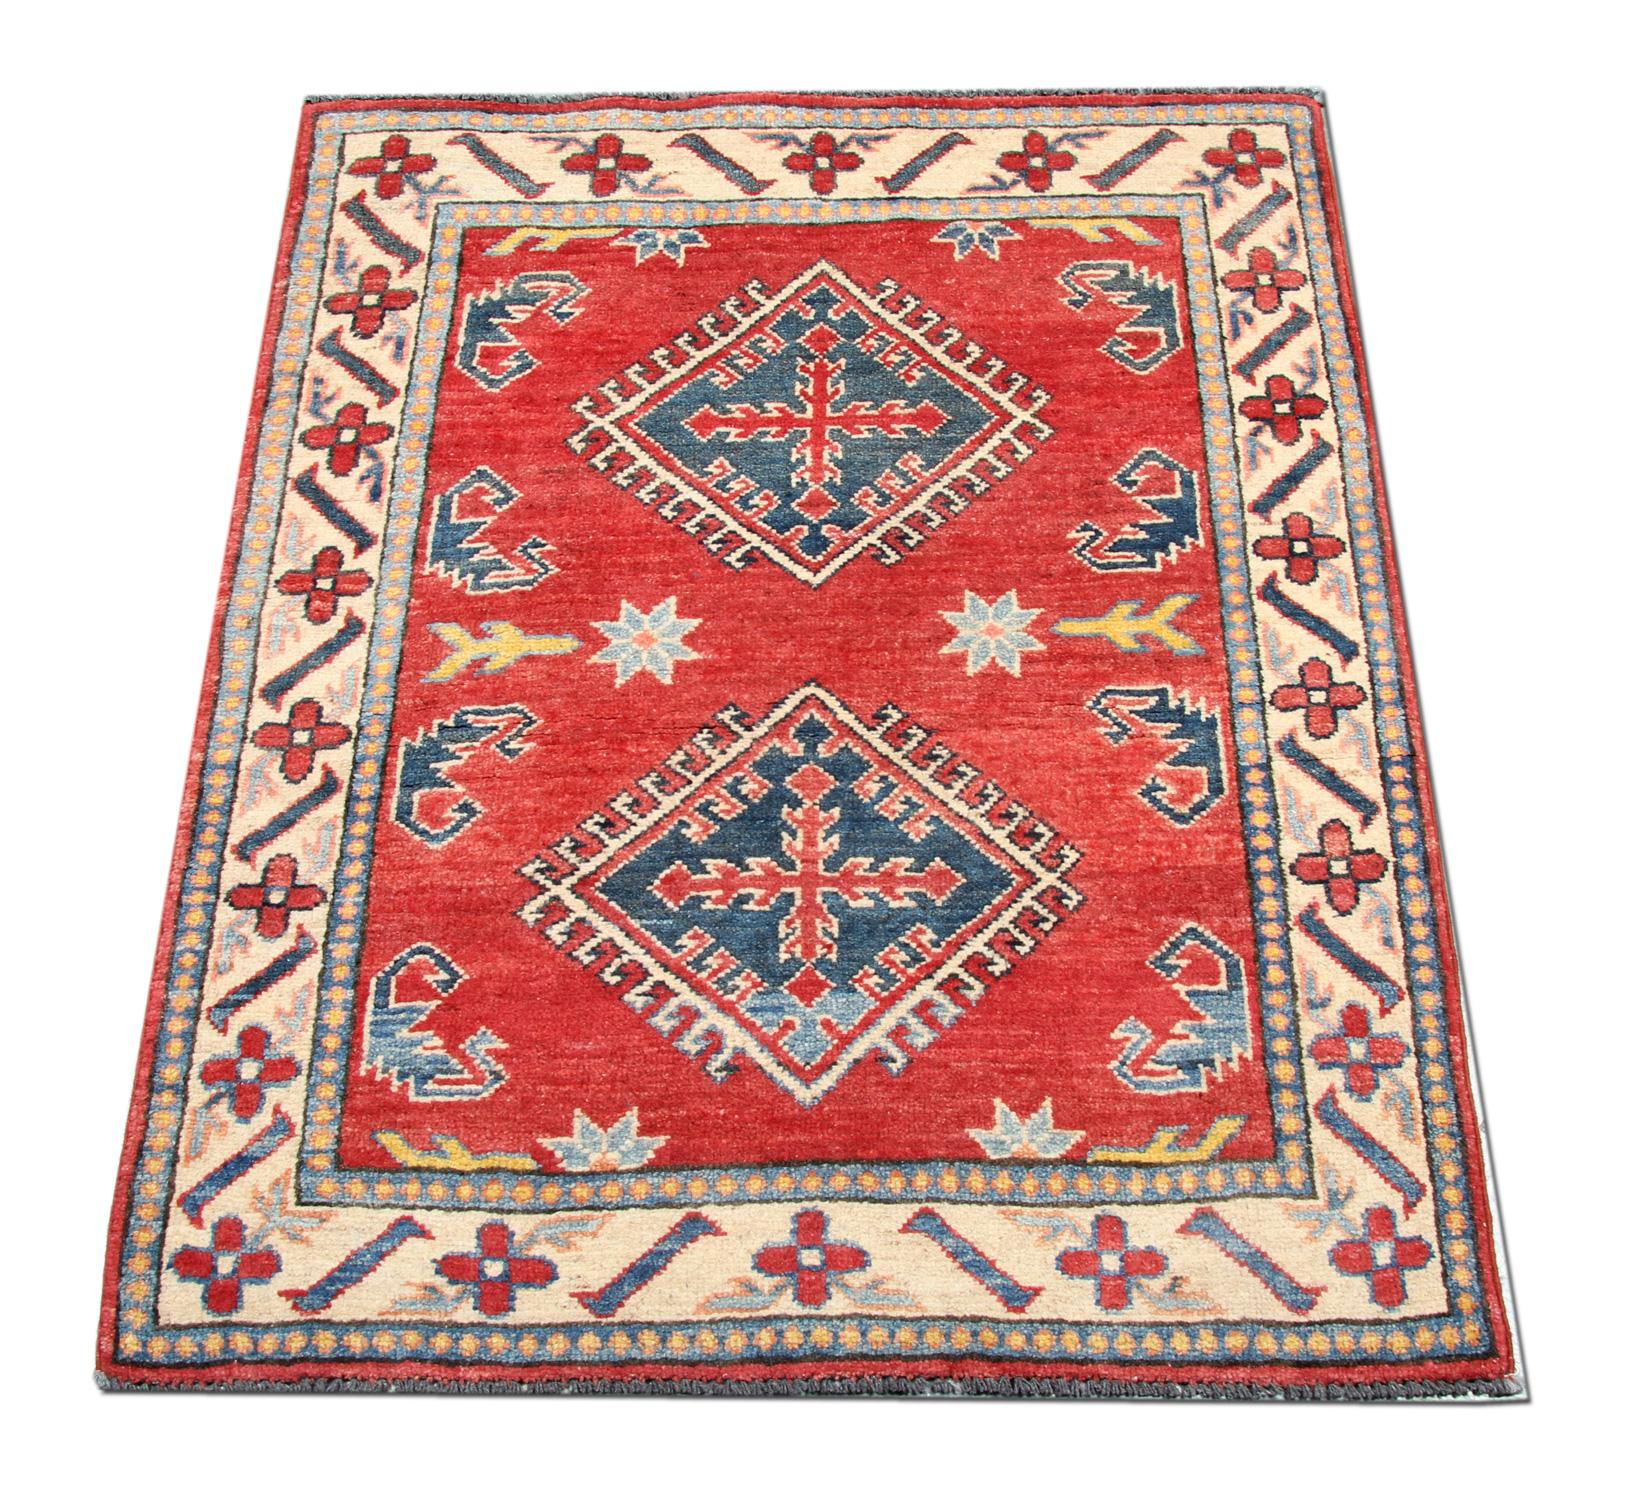 This small new traditional handwoven rug features designs from the Kazak region. Traditional rugs are making the region of Afghanistan. Afghan weavers have made this floral rug of top-quality wool and cotton. In this oriental rug, there are typical